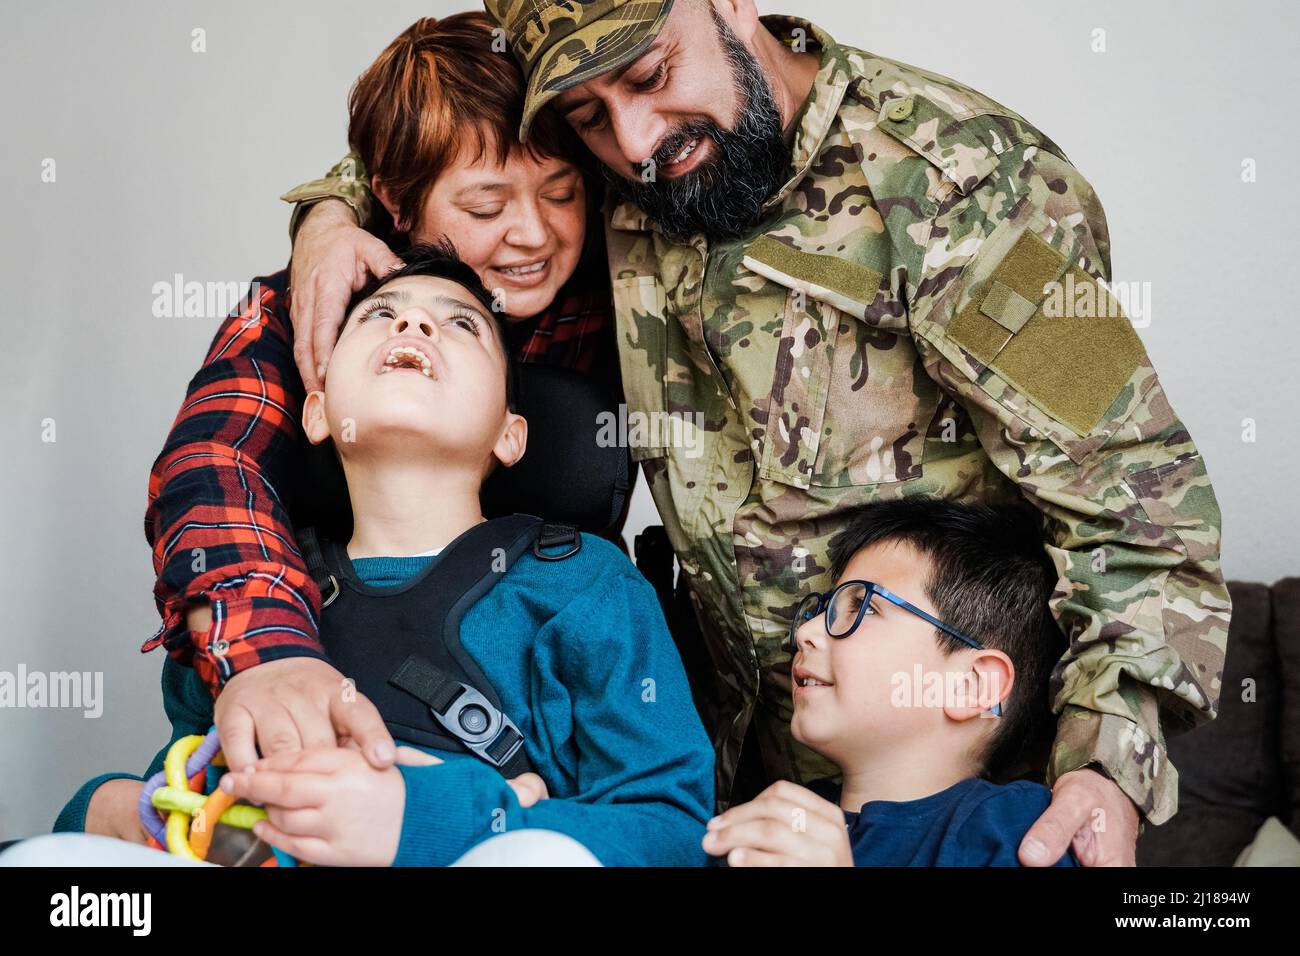 Happy military soldier having tender moment with family after homecoming reunion - Love and war concepts - Focus on veteran man face Stock Photo